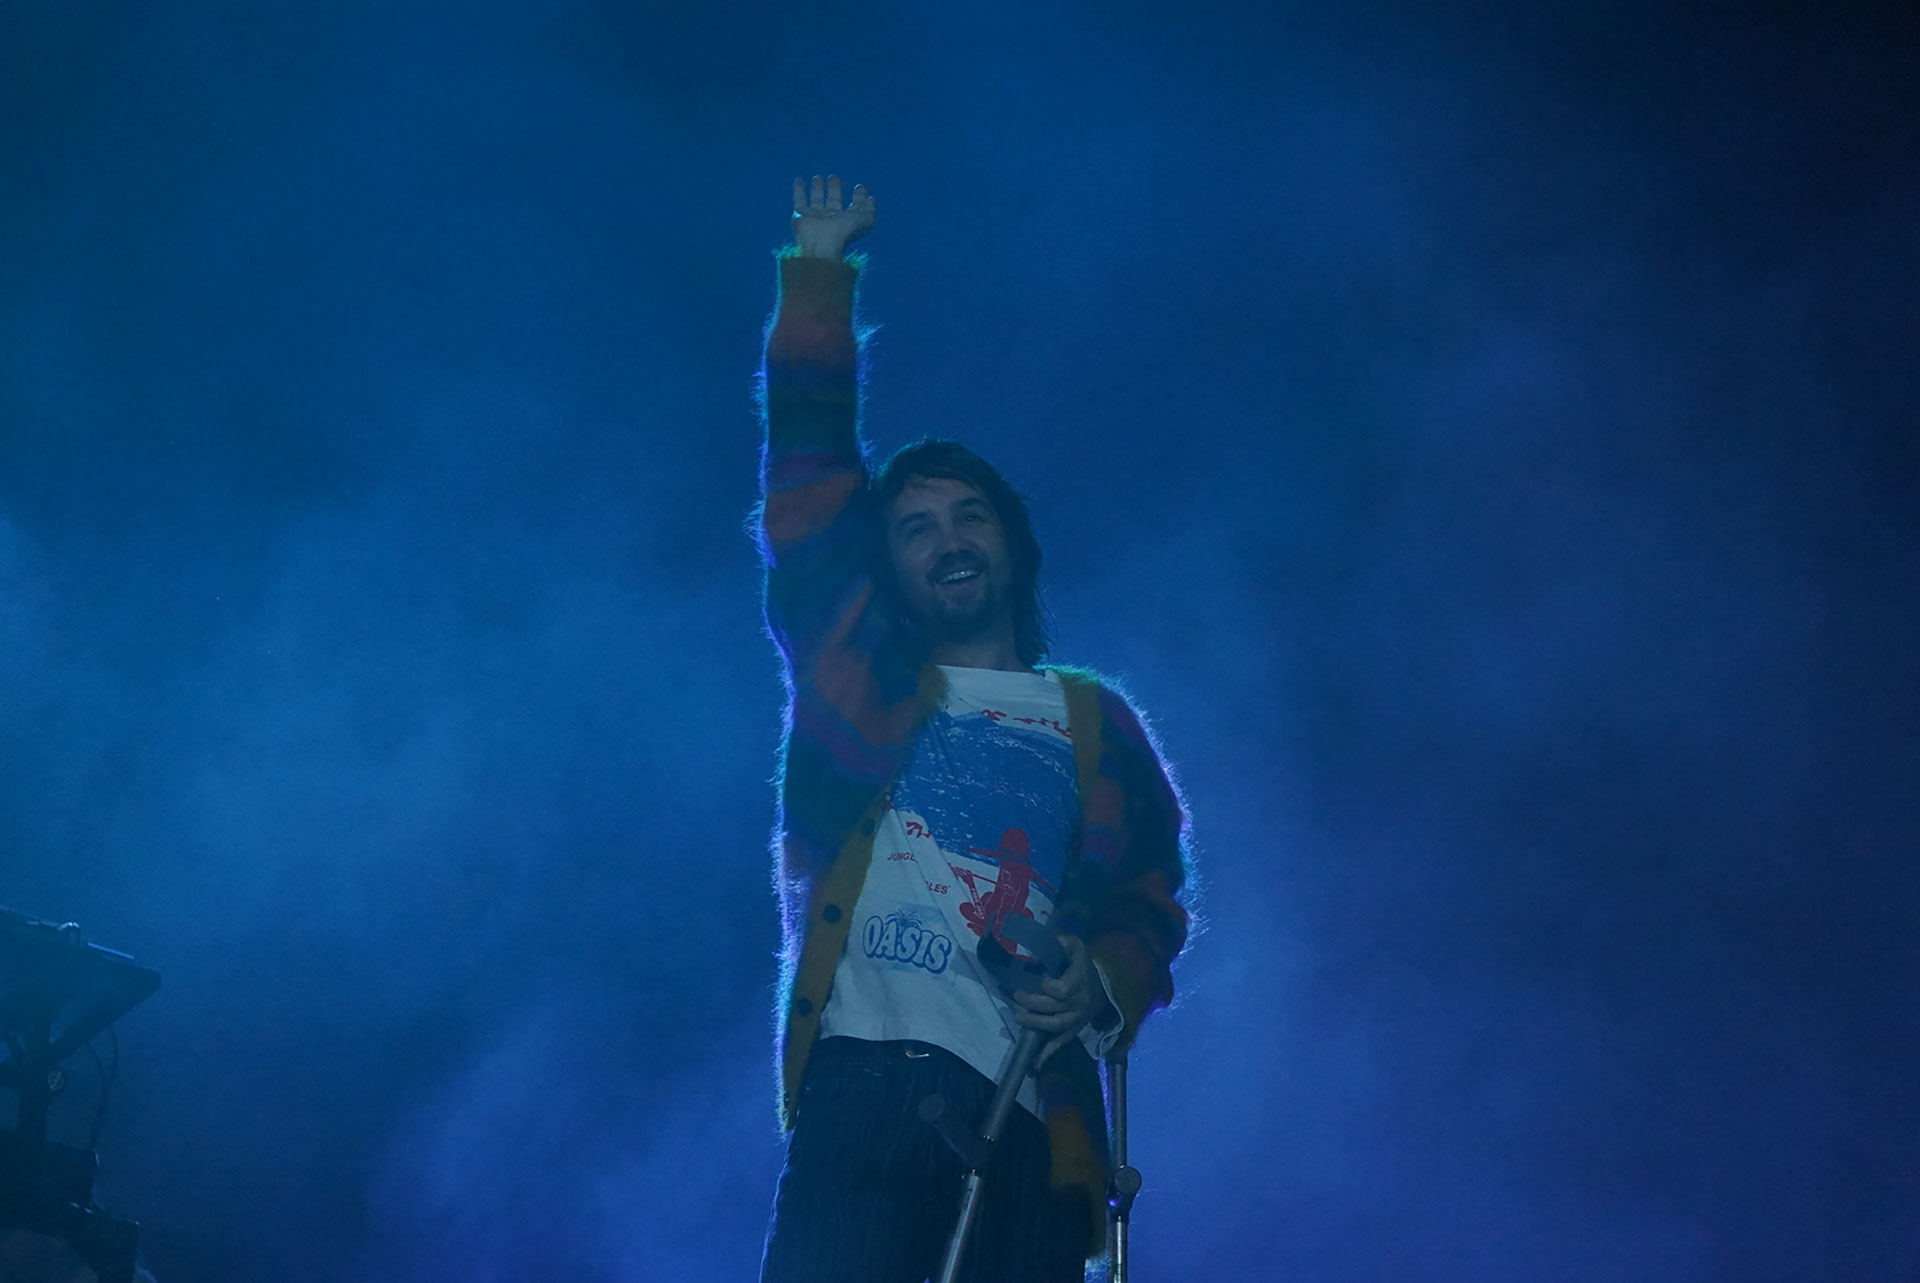 Tame Impala closed their show at Lollapalooza Argentina with 